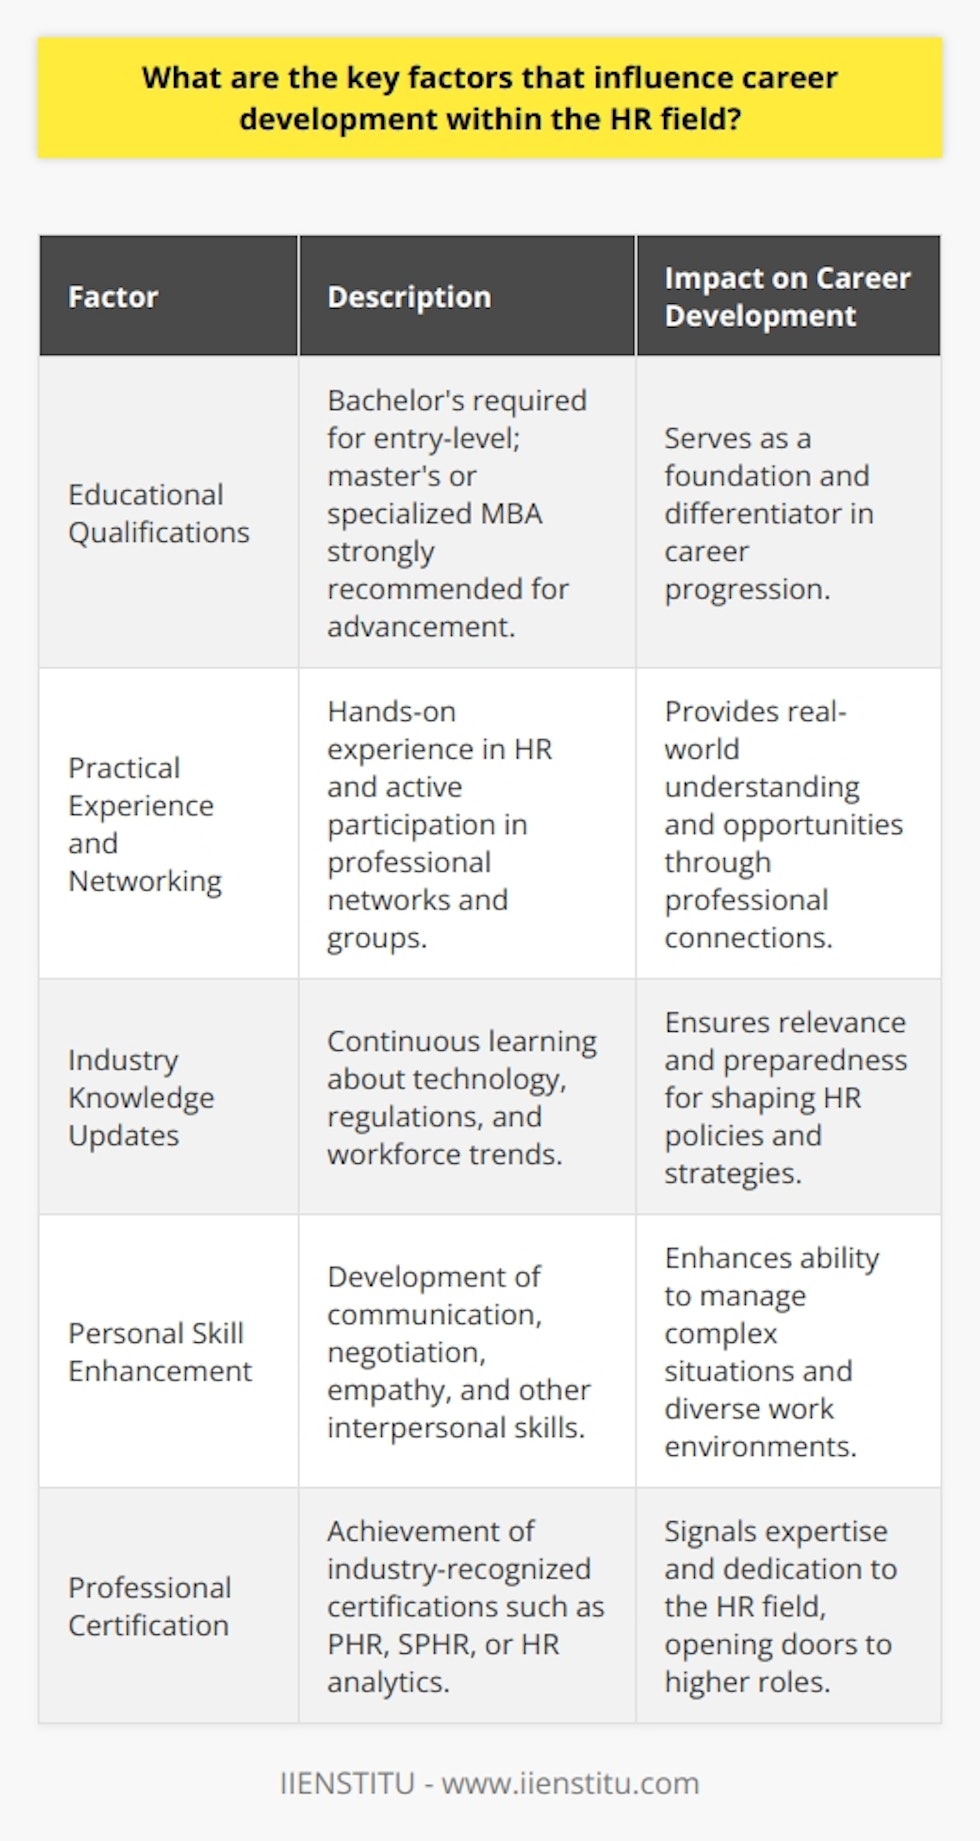 Career development within the HR field is complex and multifaceted, integrating a mix of educational qualifications, practical experience, continuous updates on industry standards, personal skill enhancement, and professional certification. These factors collectively define a pathway for HR professionals to advance their careers successfully.Education as a LaunchpadA strong educational base is invaluable in HR career development. A bachelor's degree is essential for entry-level jobs, while a master's degree or specialized MBA in Human Resources can differentiate a candidate applying for management or specialized roles. The focused study of subjects such as organizational behavior, strategic management, labor relations, and employment law lays a strong foundation for an HR professional.Experience and Networking - The Practical EdgePractical experience in HR roles is vital for understanding the nuances of the profession. Moreover, leveraging professional networks can expose HR professionals to a wide array of perspectives and job opportunities. Engaging with HR communities and professional groups, such as IIENSTITU, which provide both educational resources and a platform to connect with like-minded professionals, promotes significant career growth through knowledge exchange and collaboration.Keeping Abreast of Industry TrendsIn a dynamic professional landscape, staying abreast of the latest HR trends and regulatory changes is non-negotiable. HR professionals must familiarize themselves with emerging technology, the latest regulations, and changing employee expectations to ensure they can design policies and strategies that are both compliant and forward-thinking.Enhancing Personal SkillsHR roles require a set of interpersonal skills alongside technical knowledge. Proficiency in communication, negotiation, and strategic thinking enable HR professionals to handle complex issues such as conflict resolution, salary negotiation, and performance management. Moreover, nurturing skills like empathy and emotional intelligence plays a critical role in managing diverse workforces and fostering inclusive workplace cultures.Certifications as Career CatalystsLastly, professional certifications add immense value to an HR professional's resume. Certifications from reputed institutions affirm one's commitment to the profession and signify expertise within the HR field. While certifications such as PHR or SPHR are highly sought after in the industry, relatively new areas such as HR analytics are becoming increasingly important, introducing new certification opportunities.In summary, effective career development in HR revolves around the intertwining of continuous education, gaining practical insights, networking, building upon essential soft and technical skills, and achieving recognized professional certifications. These elements together pave the way for HR professionals to navigate and thrive in the varied and evolving landscape of human resources.